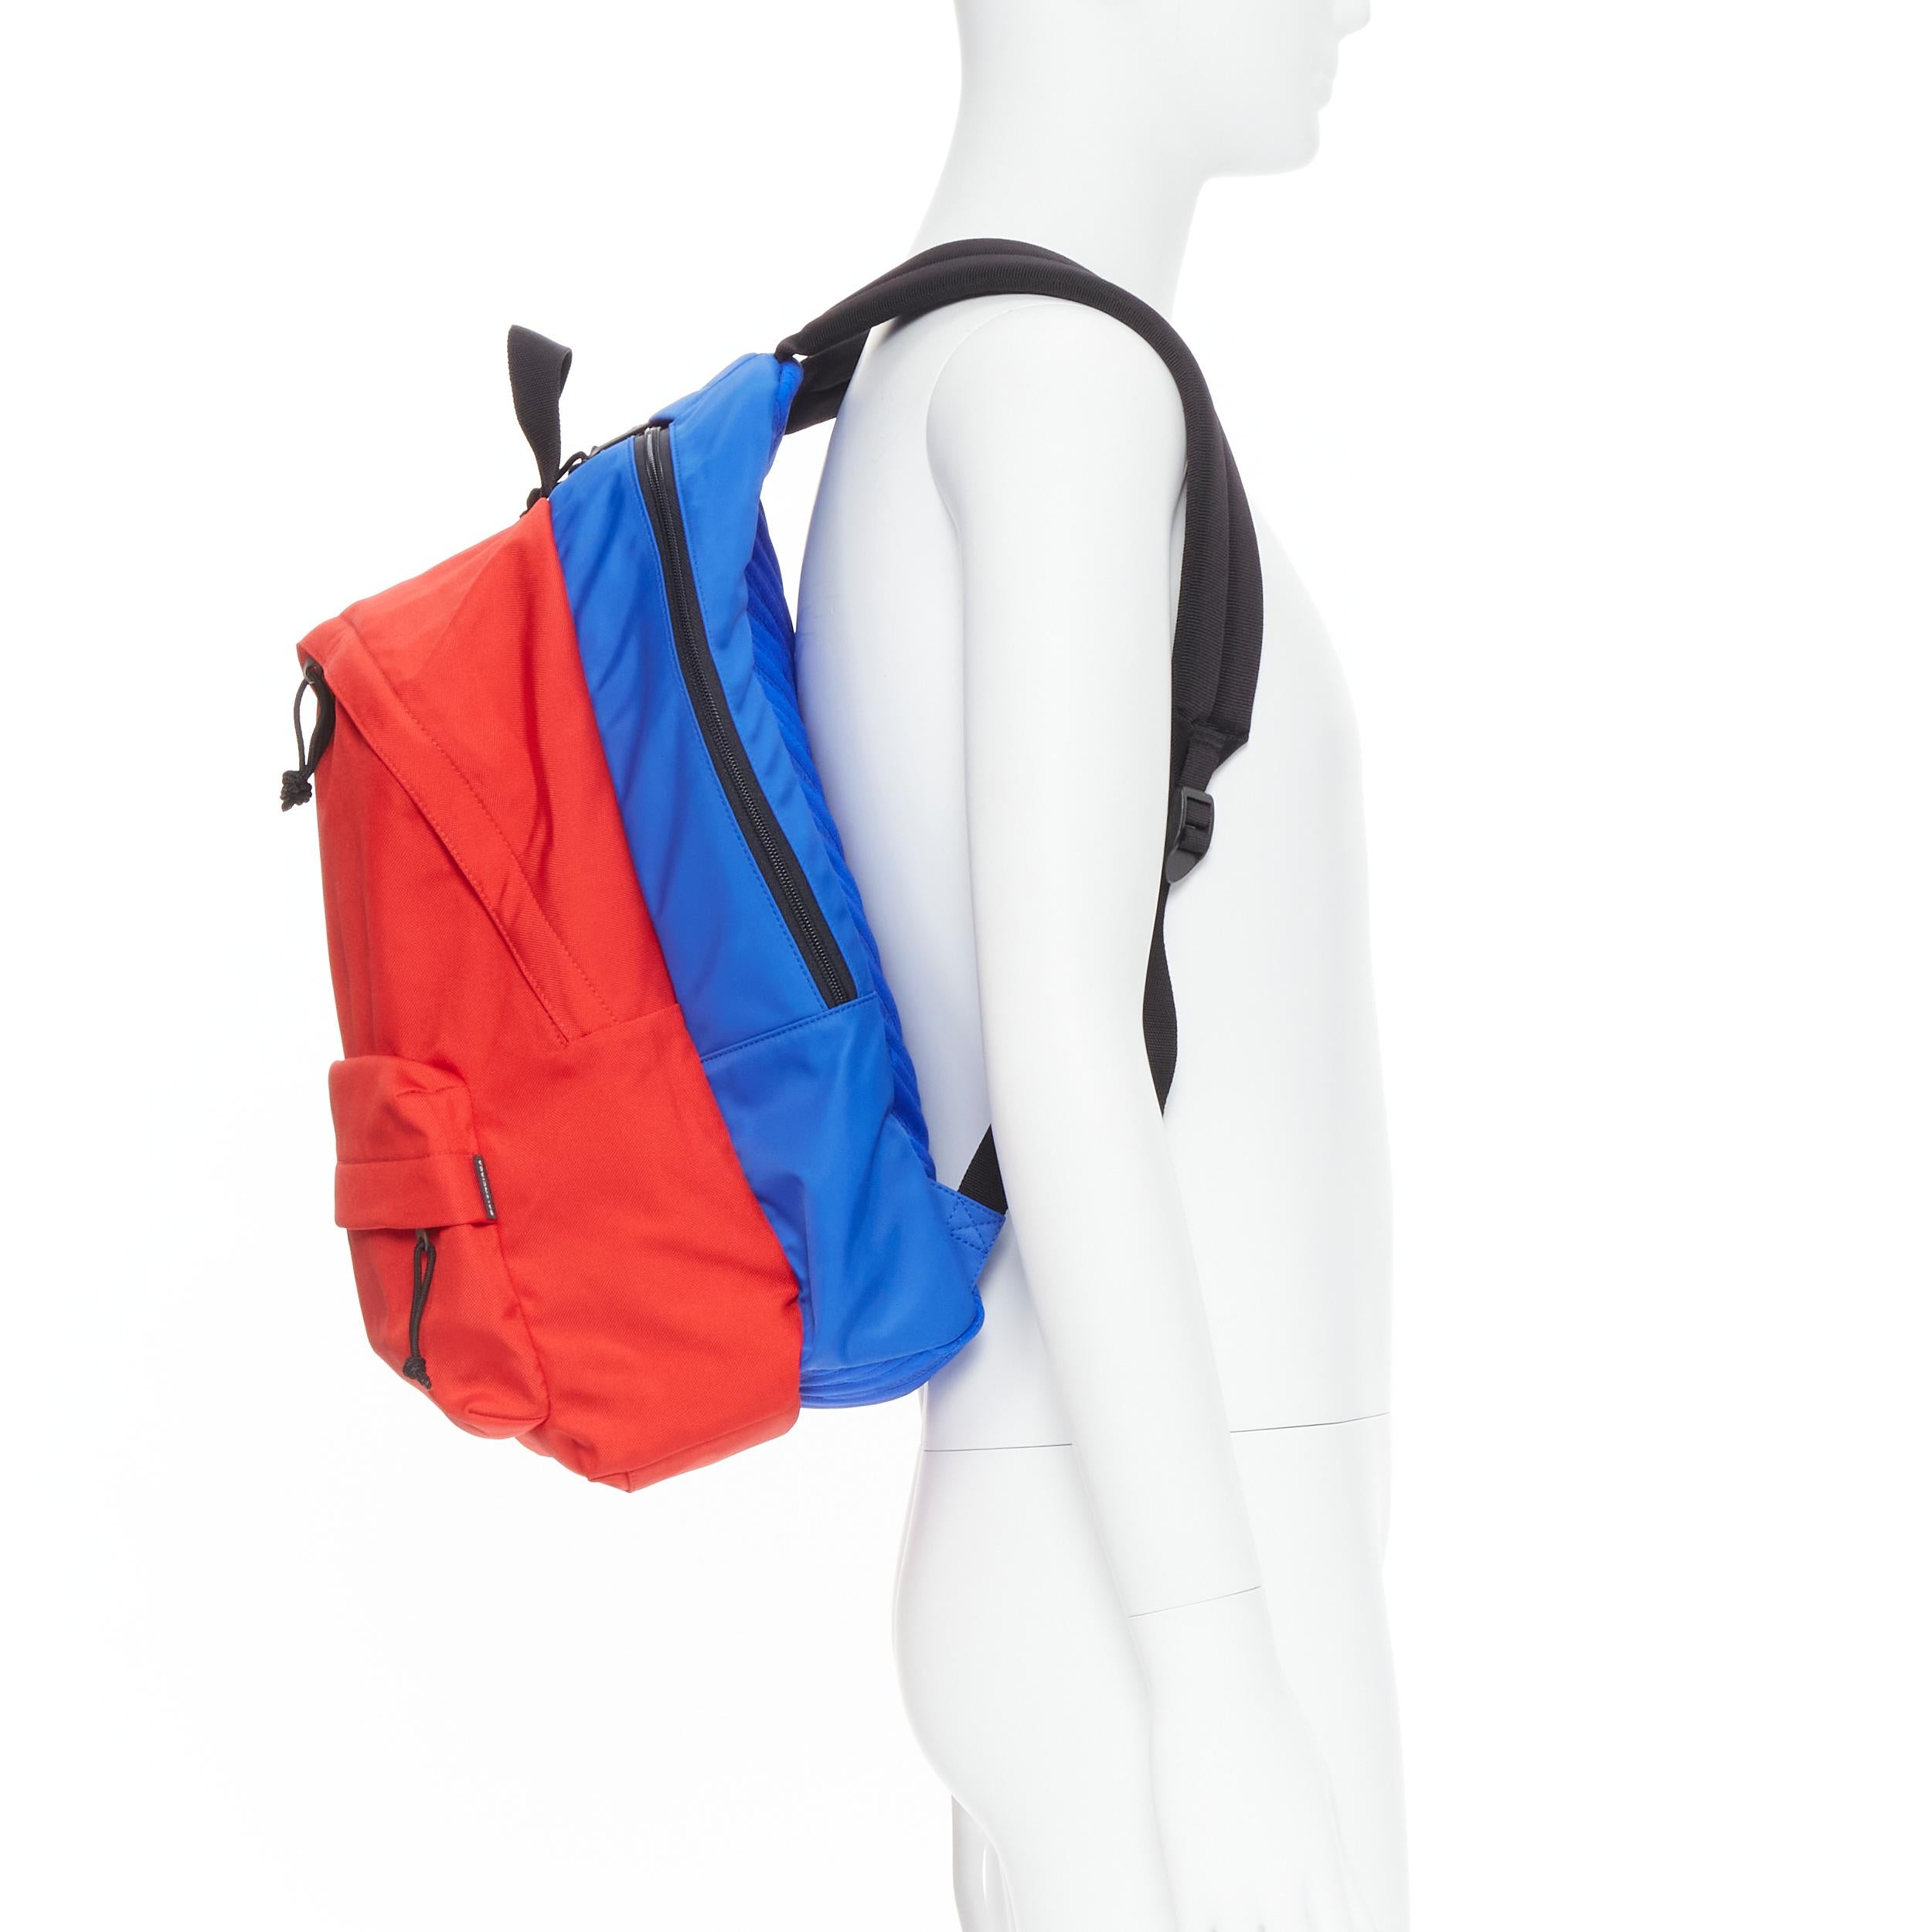 new BALENCIAGA Double Backpack red blue nylon layered monogram jacquard bag Reference: TGAS/B01522 Brand: Balenciaga Designer: Demna Gvasalia Model: Double backpack Material: Nylon Color: Red Pattern: Solid Closure: Zip Extra Detail: Double